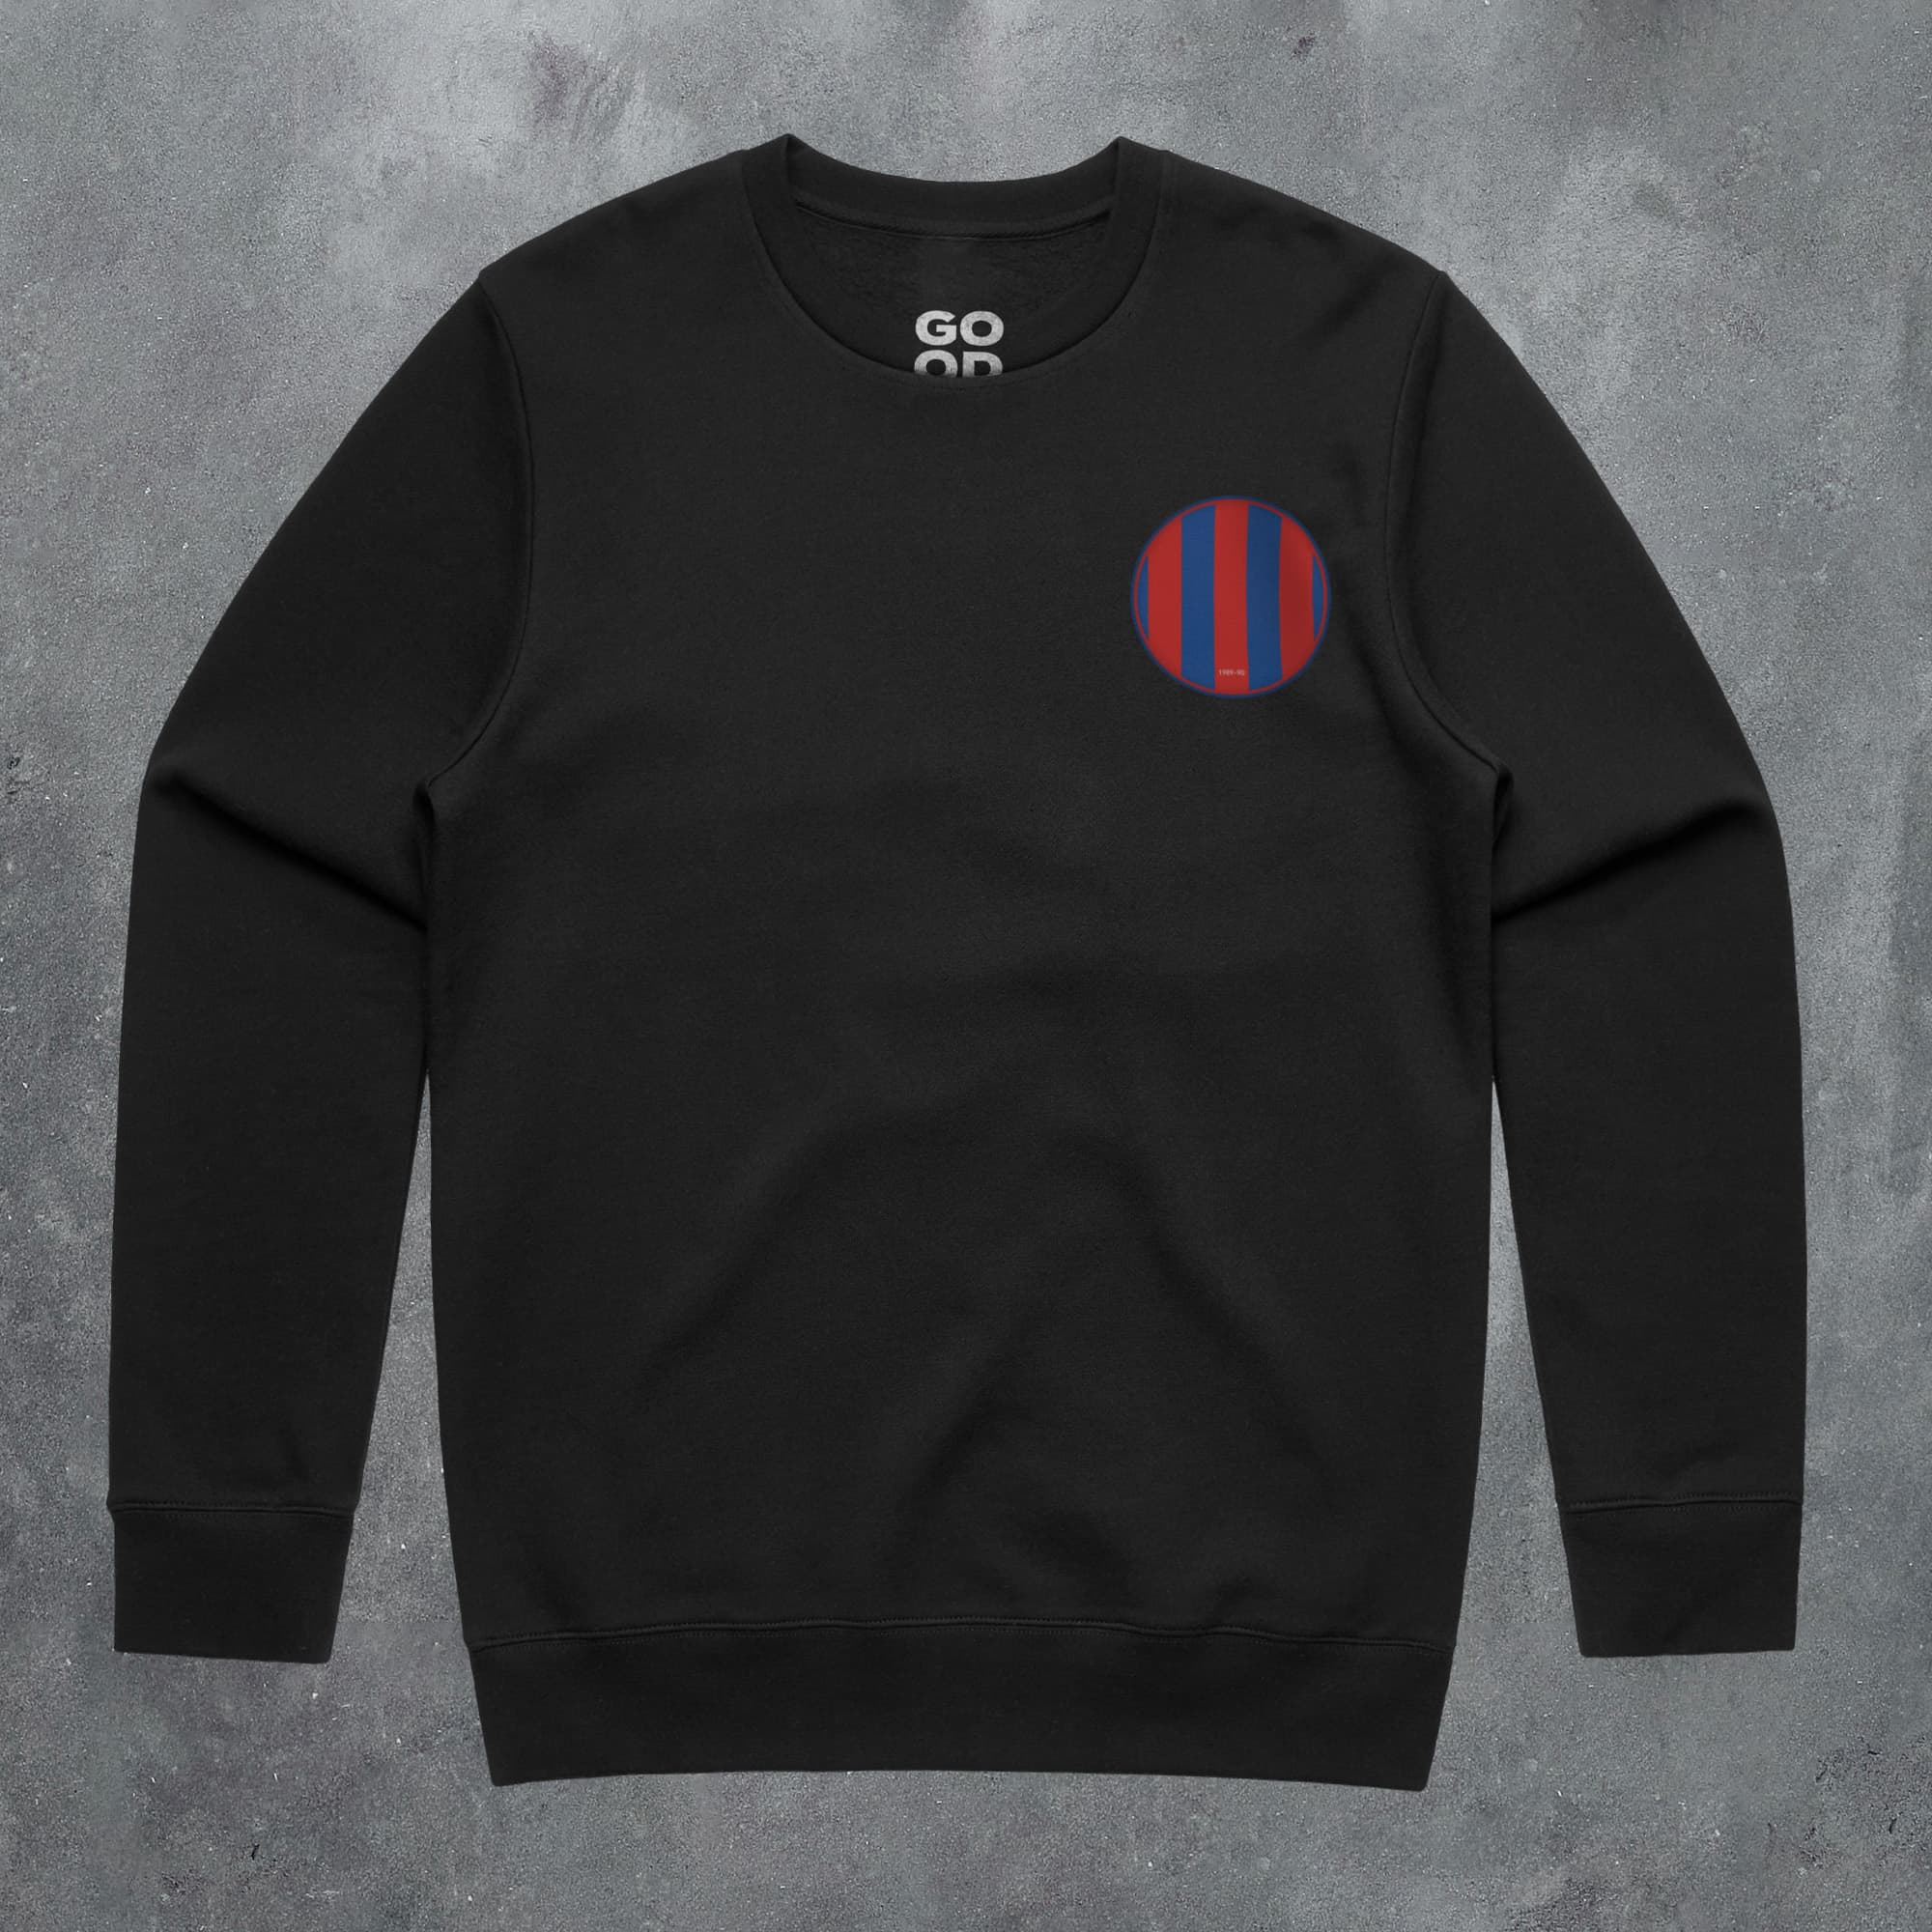 a black sweatshirt with red and blue stripes